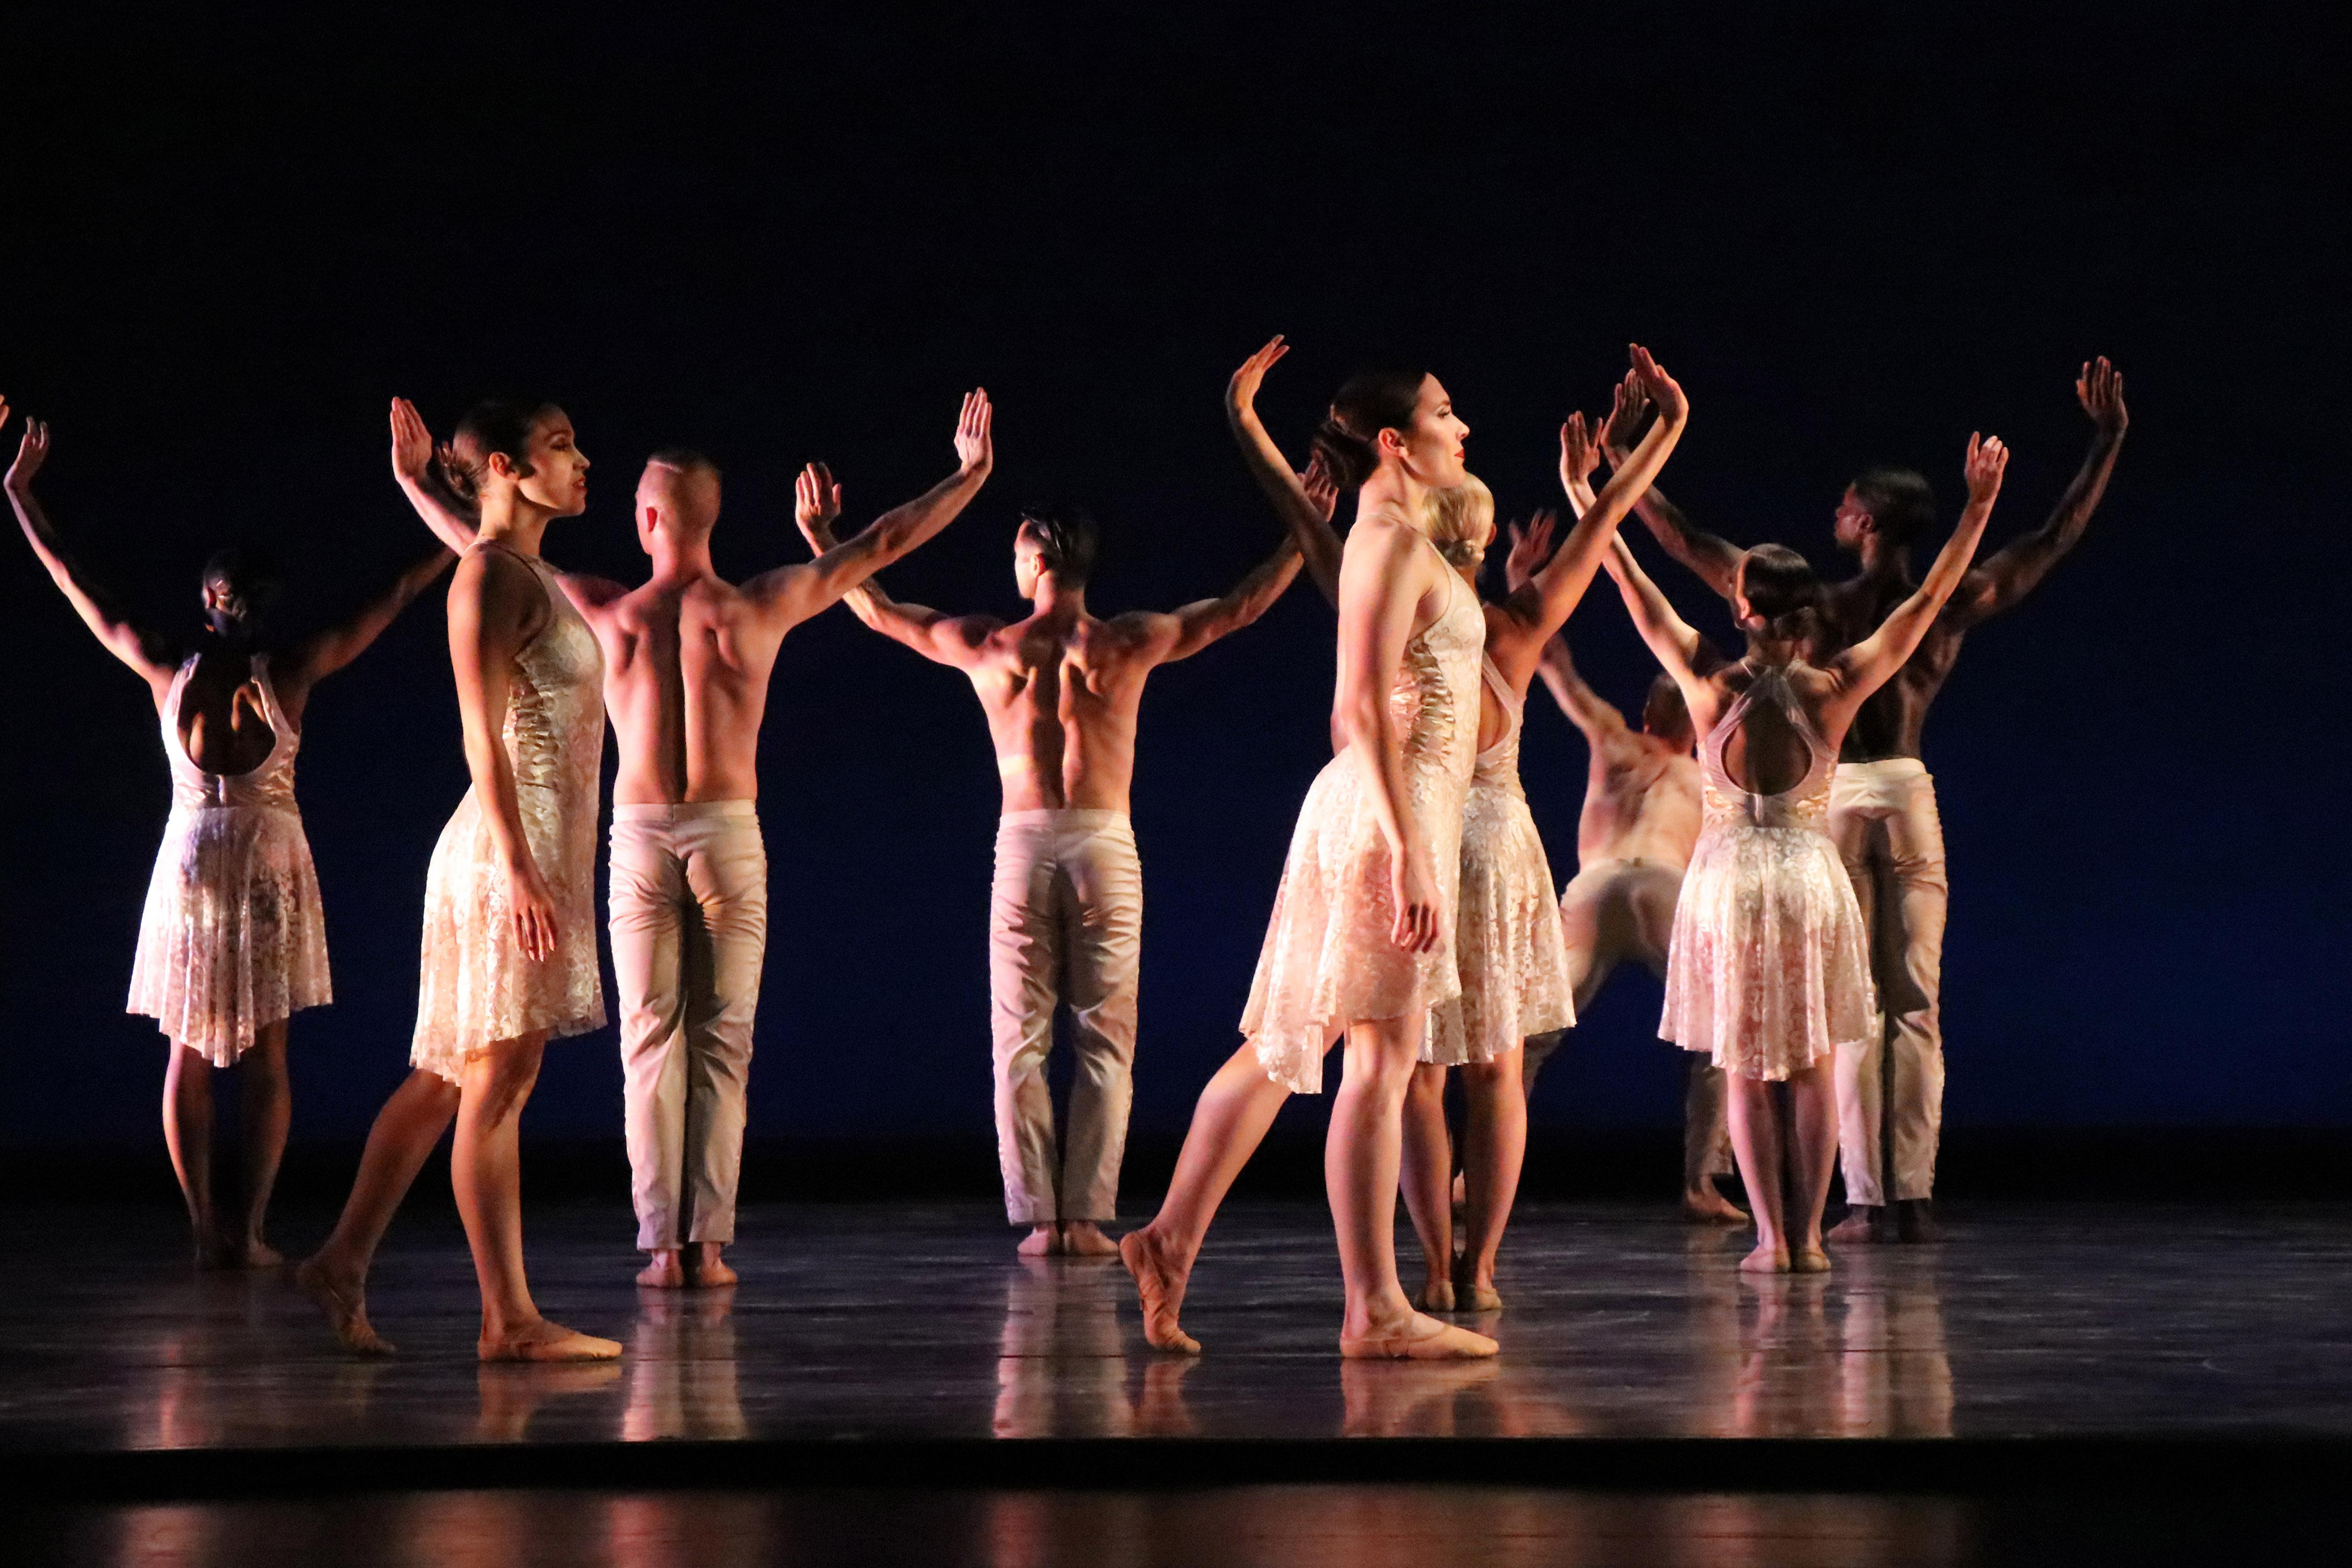 Giordano Dance Chicago in the world premiere of Davis Robertson’s “Hiding Vera” (2018). (Photo by Reveuse Photography)